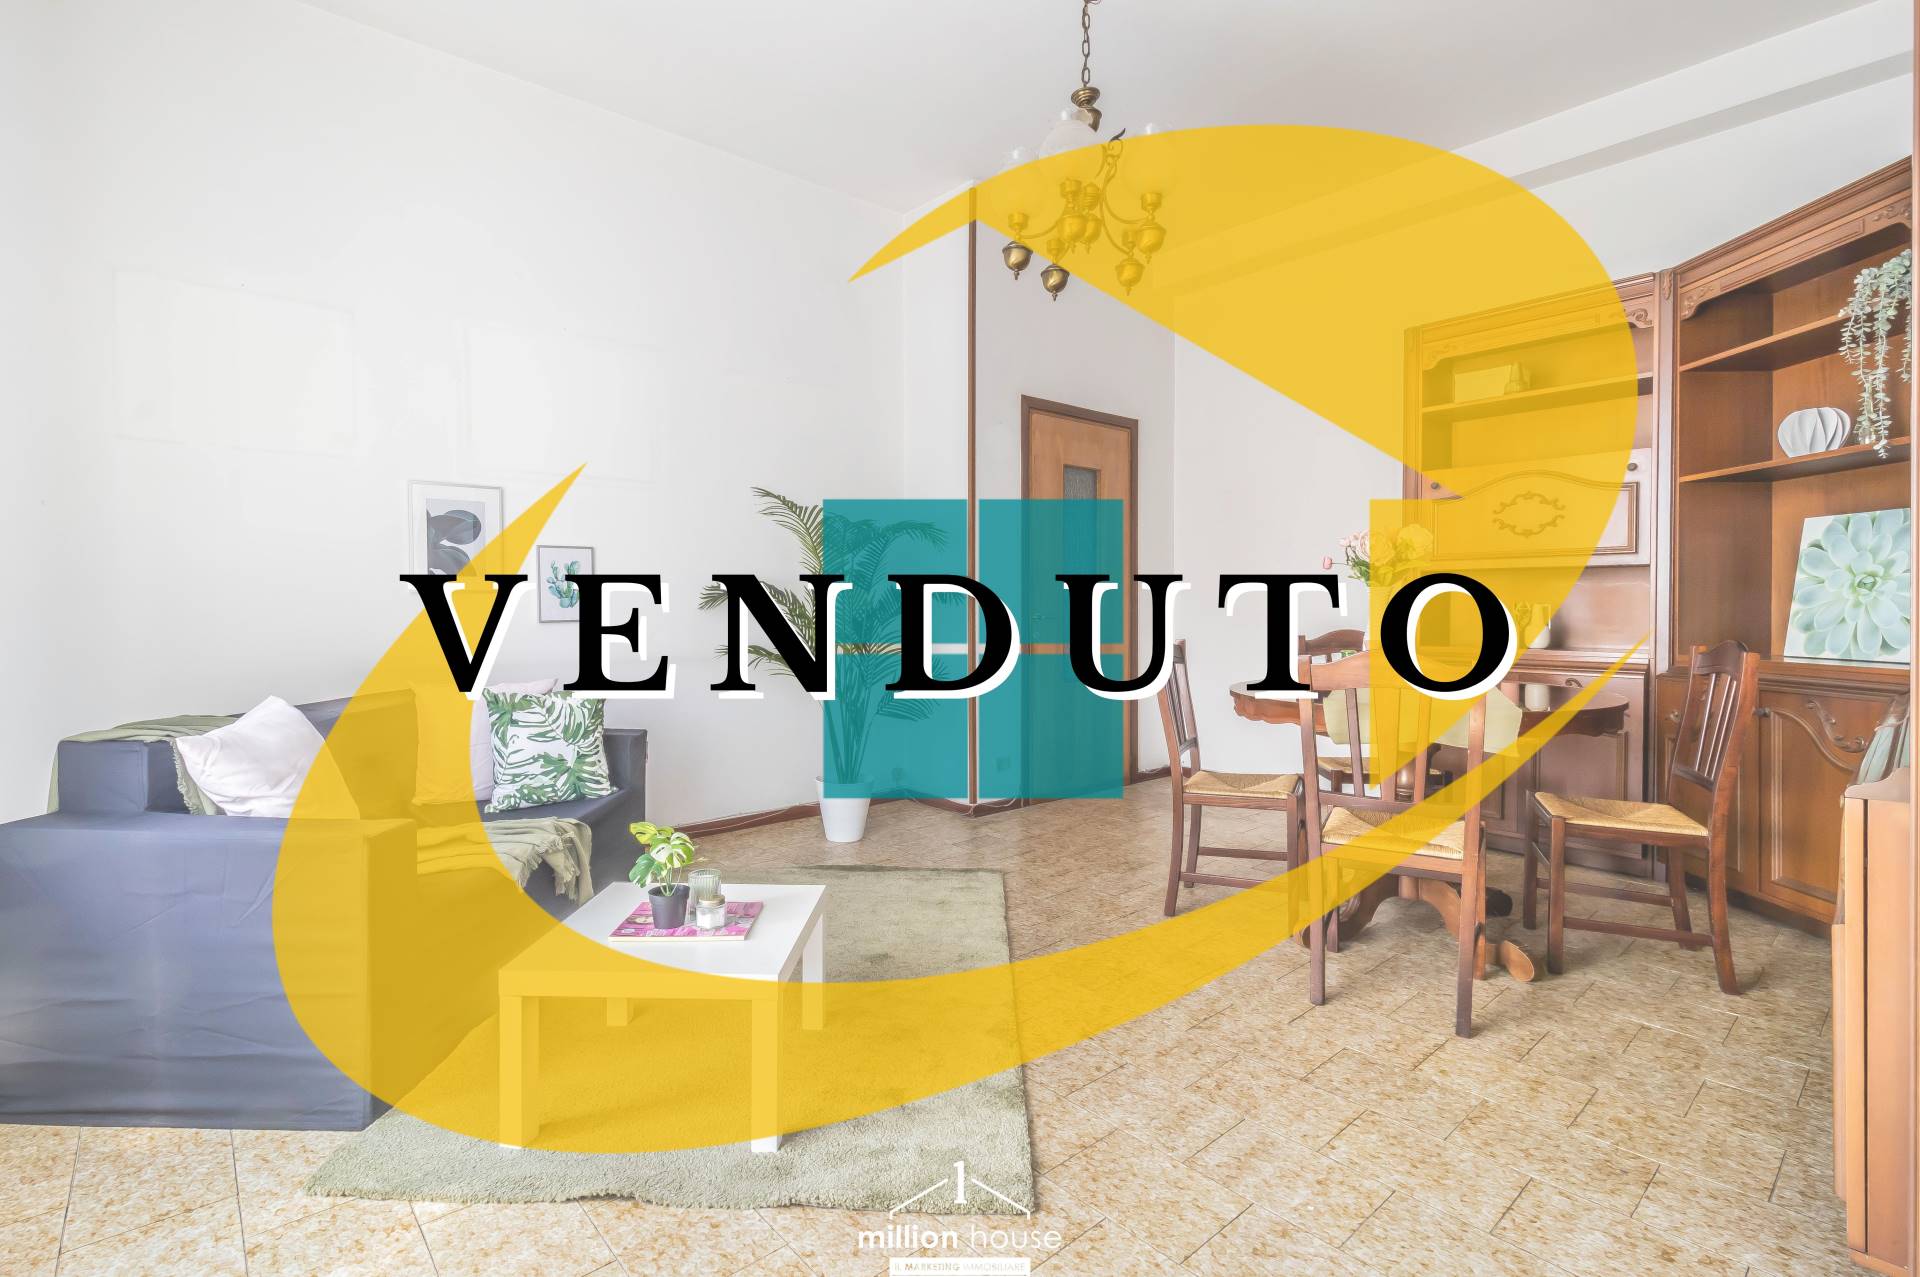 CESANO MADERNO, Apartment for sale of 93 Sq. mt., Be restored, Heating Individual heating system, Energetic class: G, Epi: 326,6 kwh/m2 year, placed 